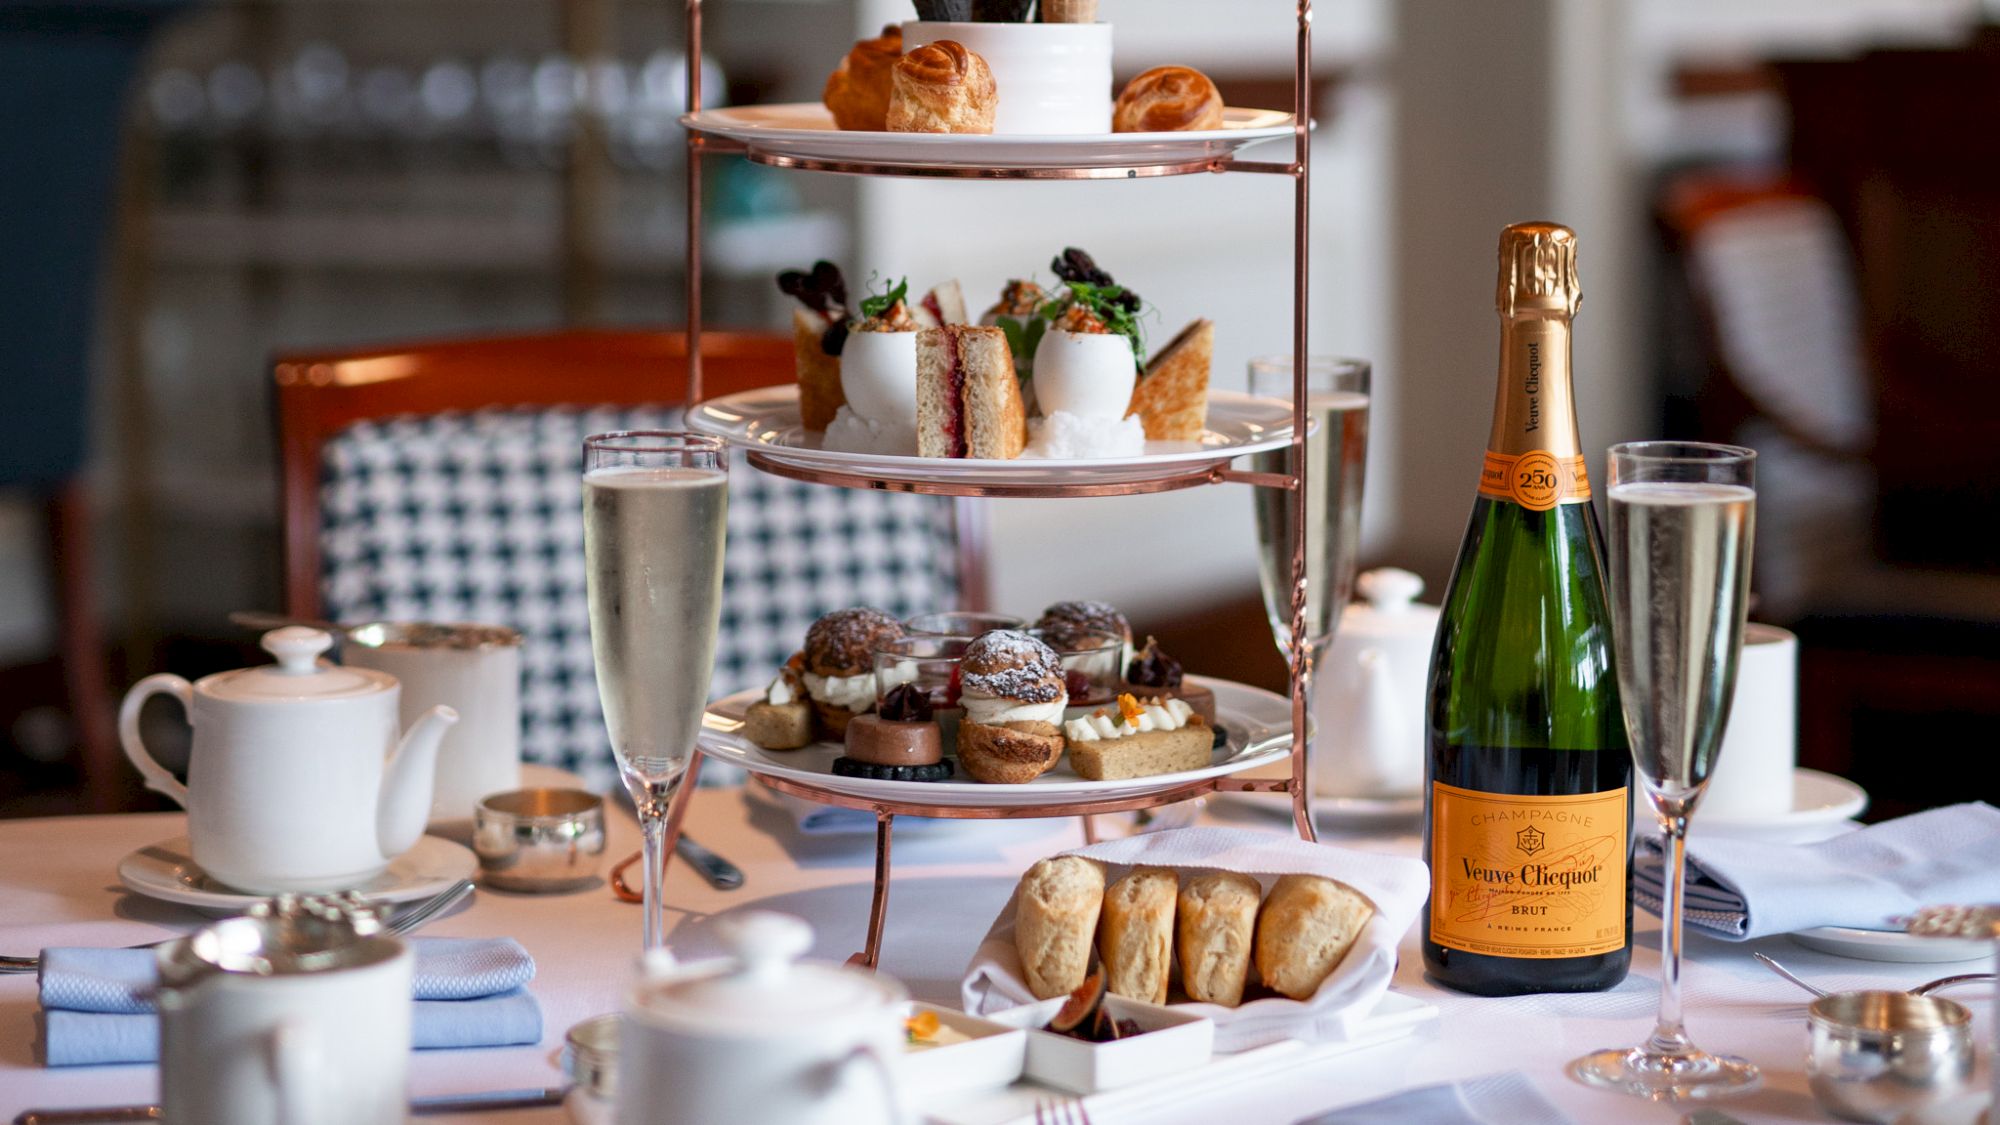 An elegant afternoon tea setup with pastries, sandwiches, and champagne.